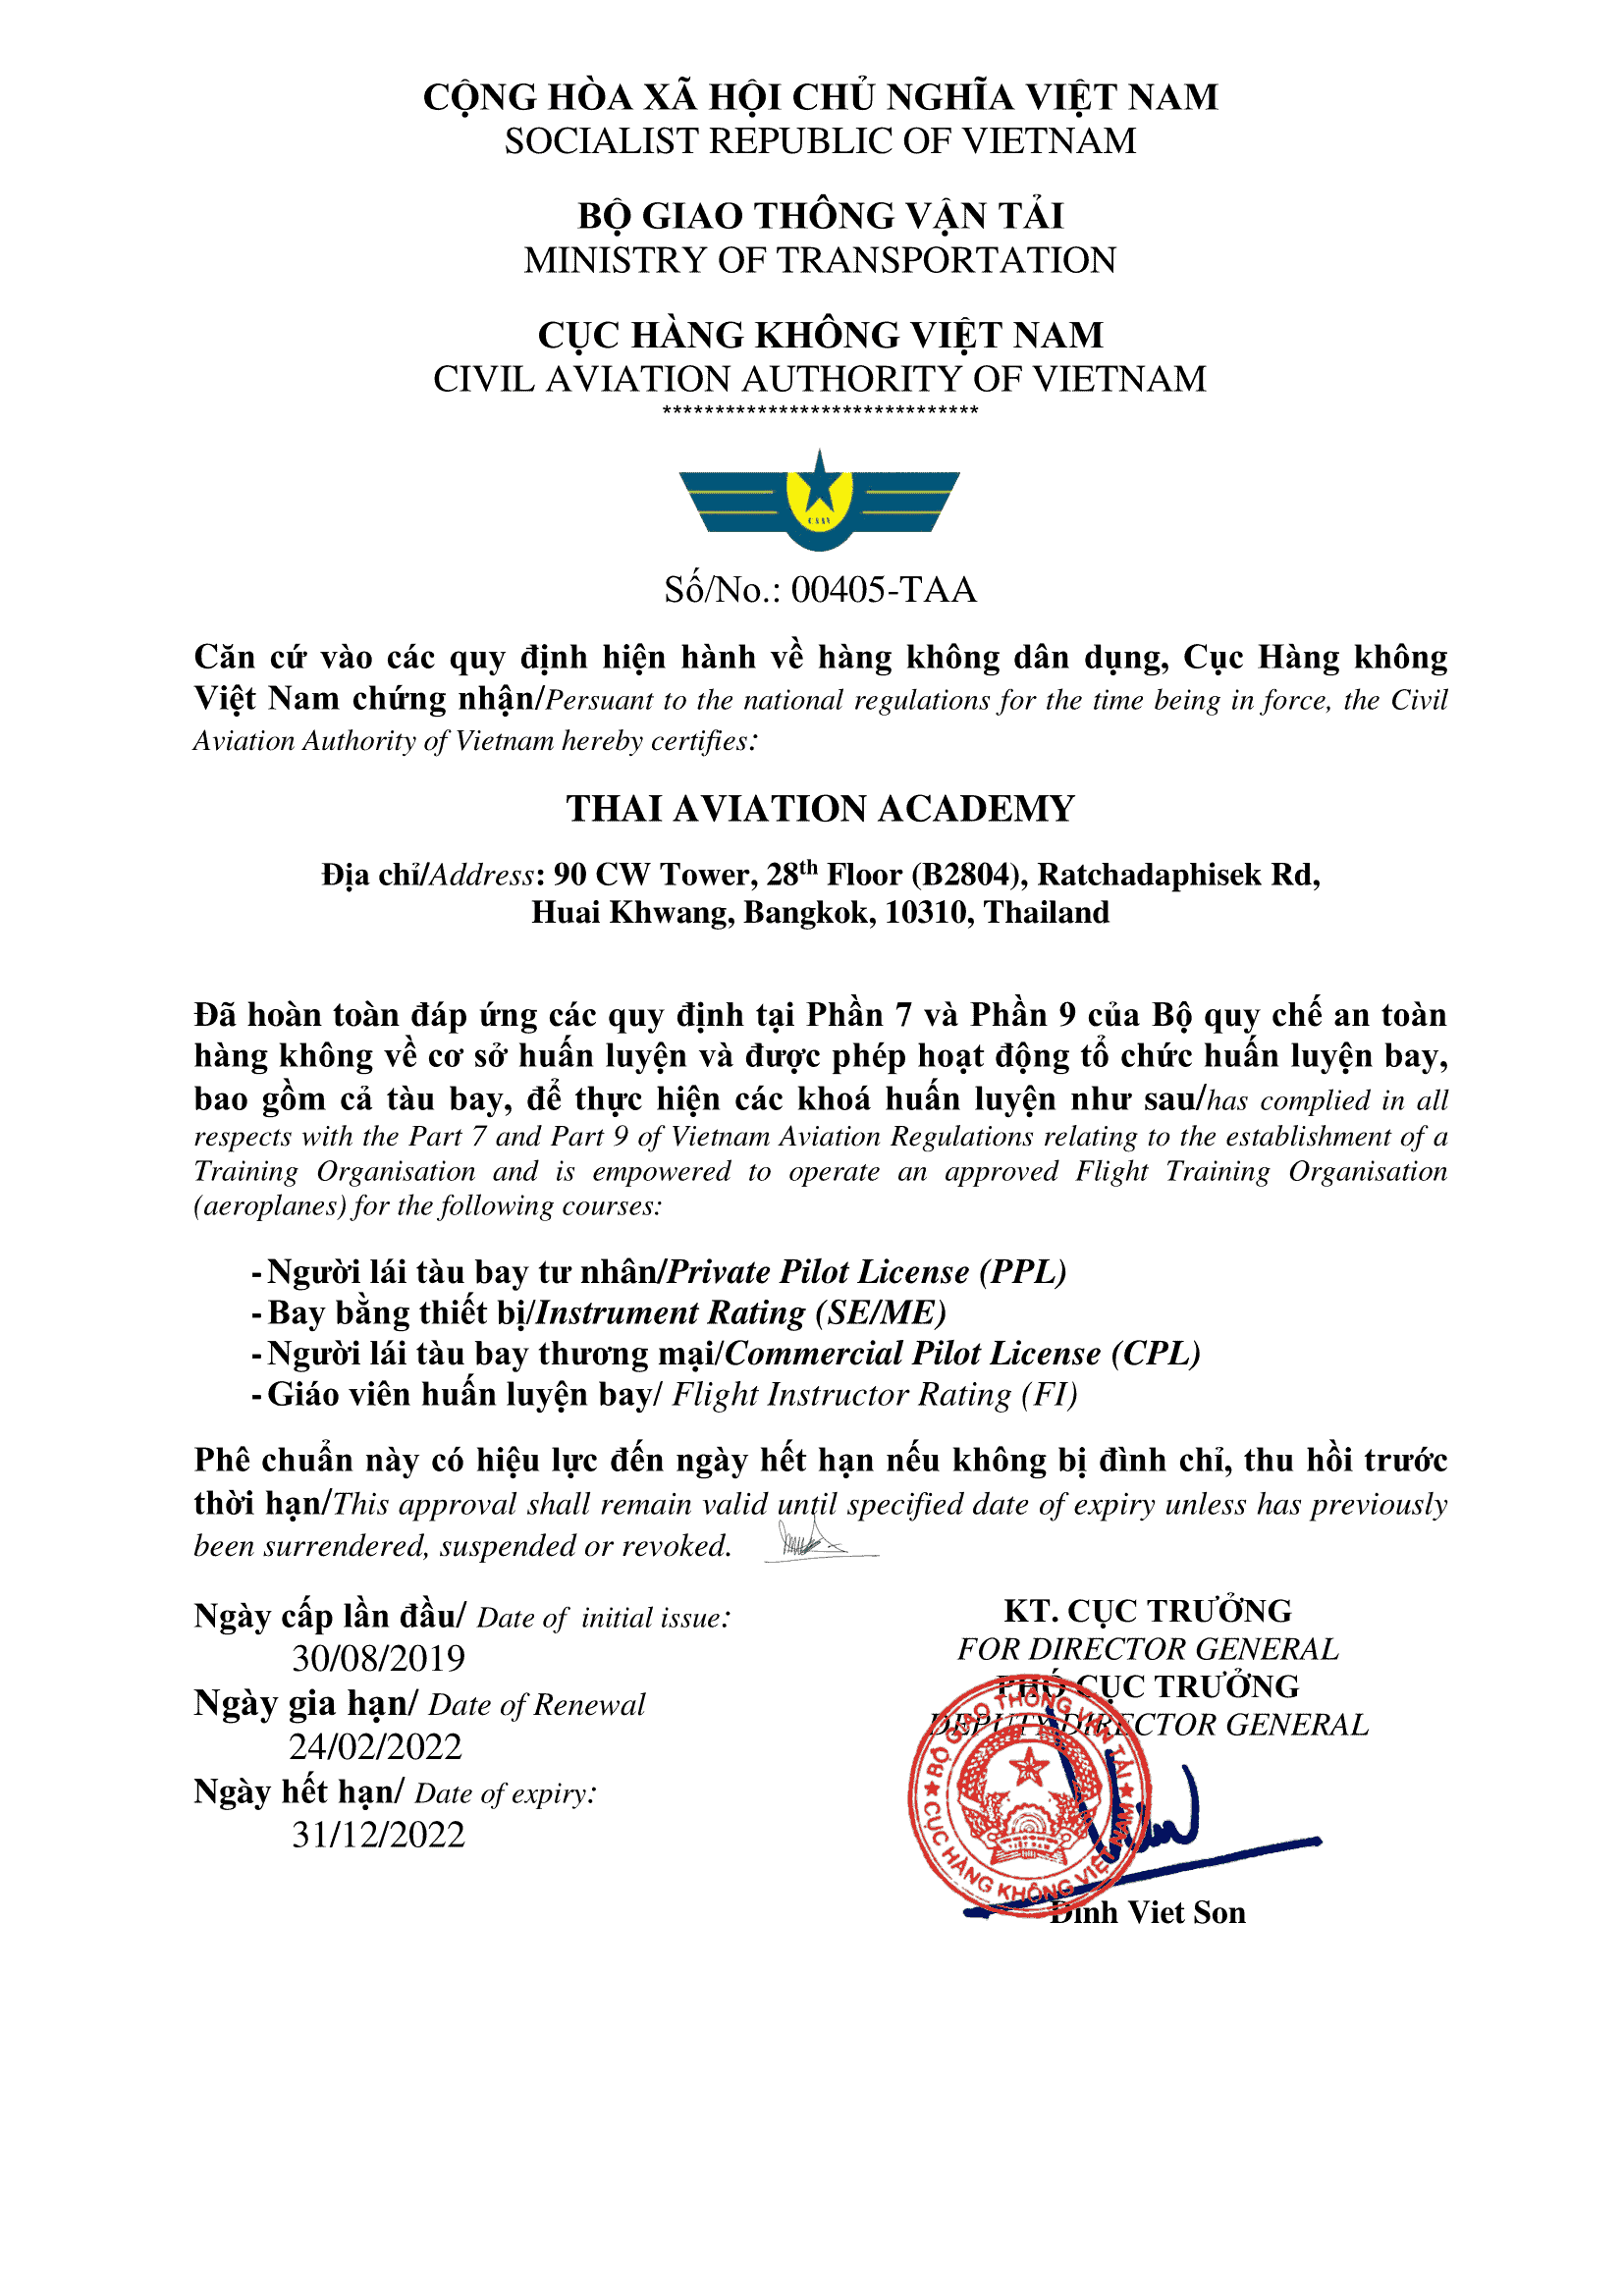 Approved Training Organization from the Civil Aviation Authority of Vietnam